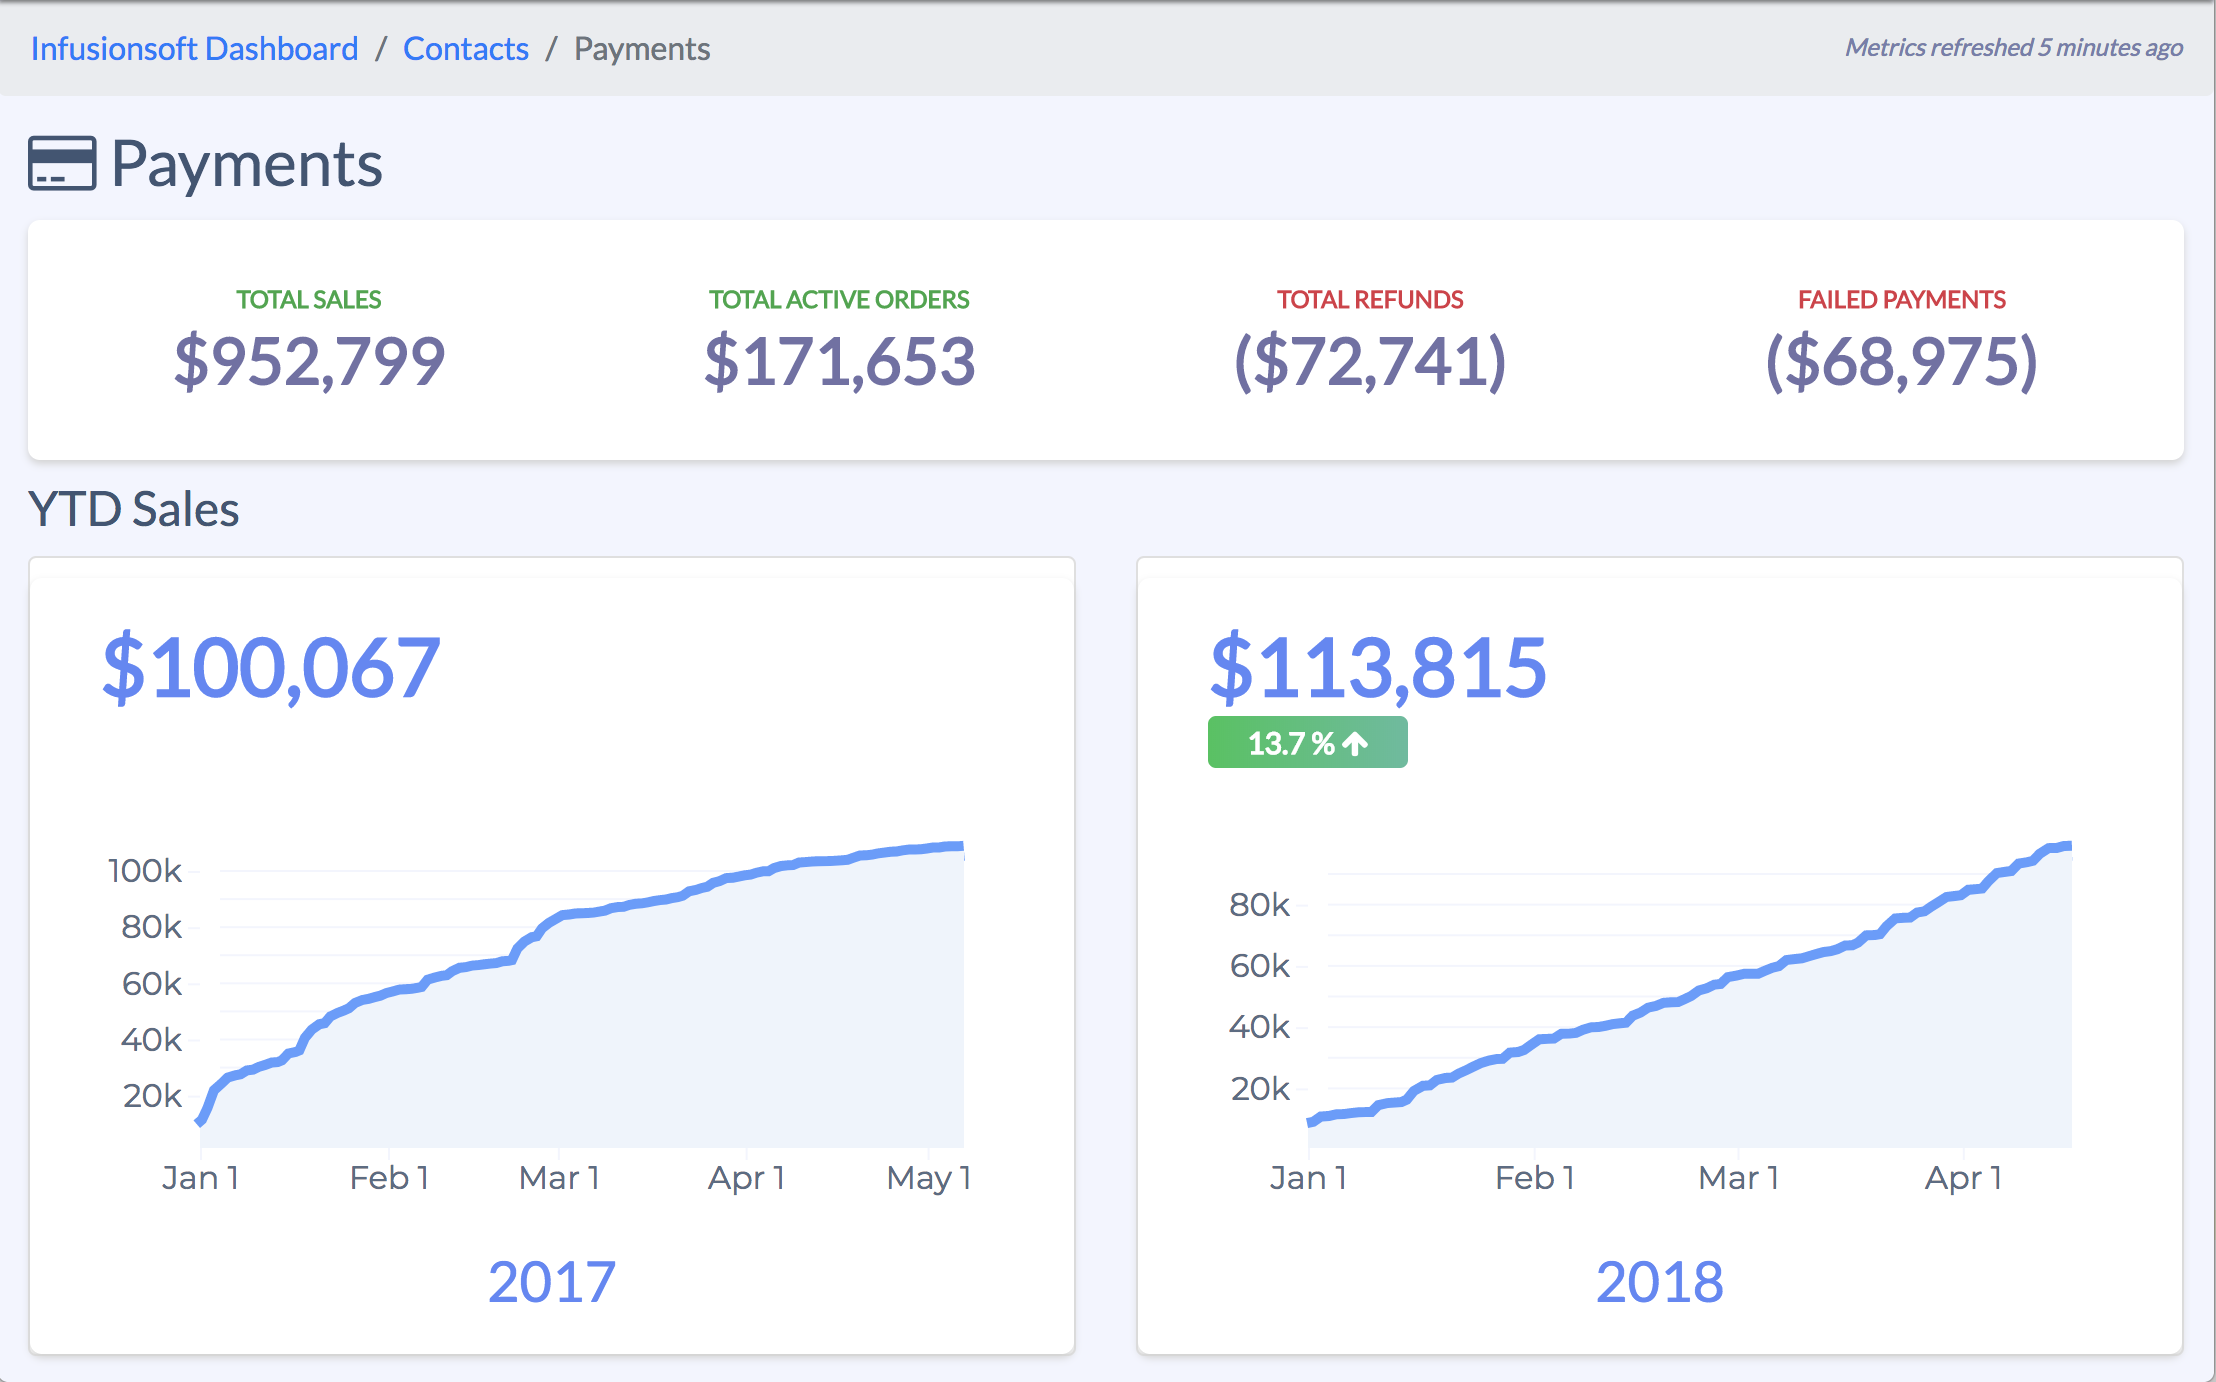 Infusionsoft payments dashboard